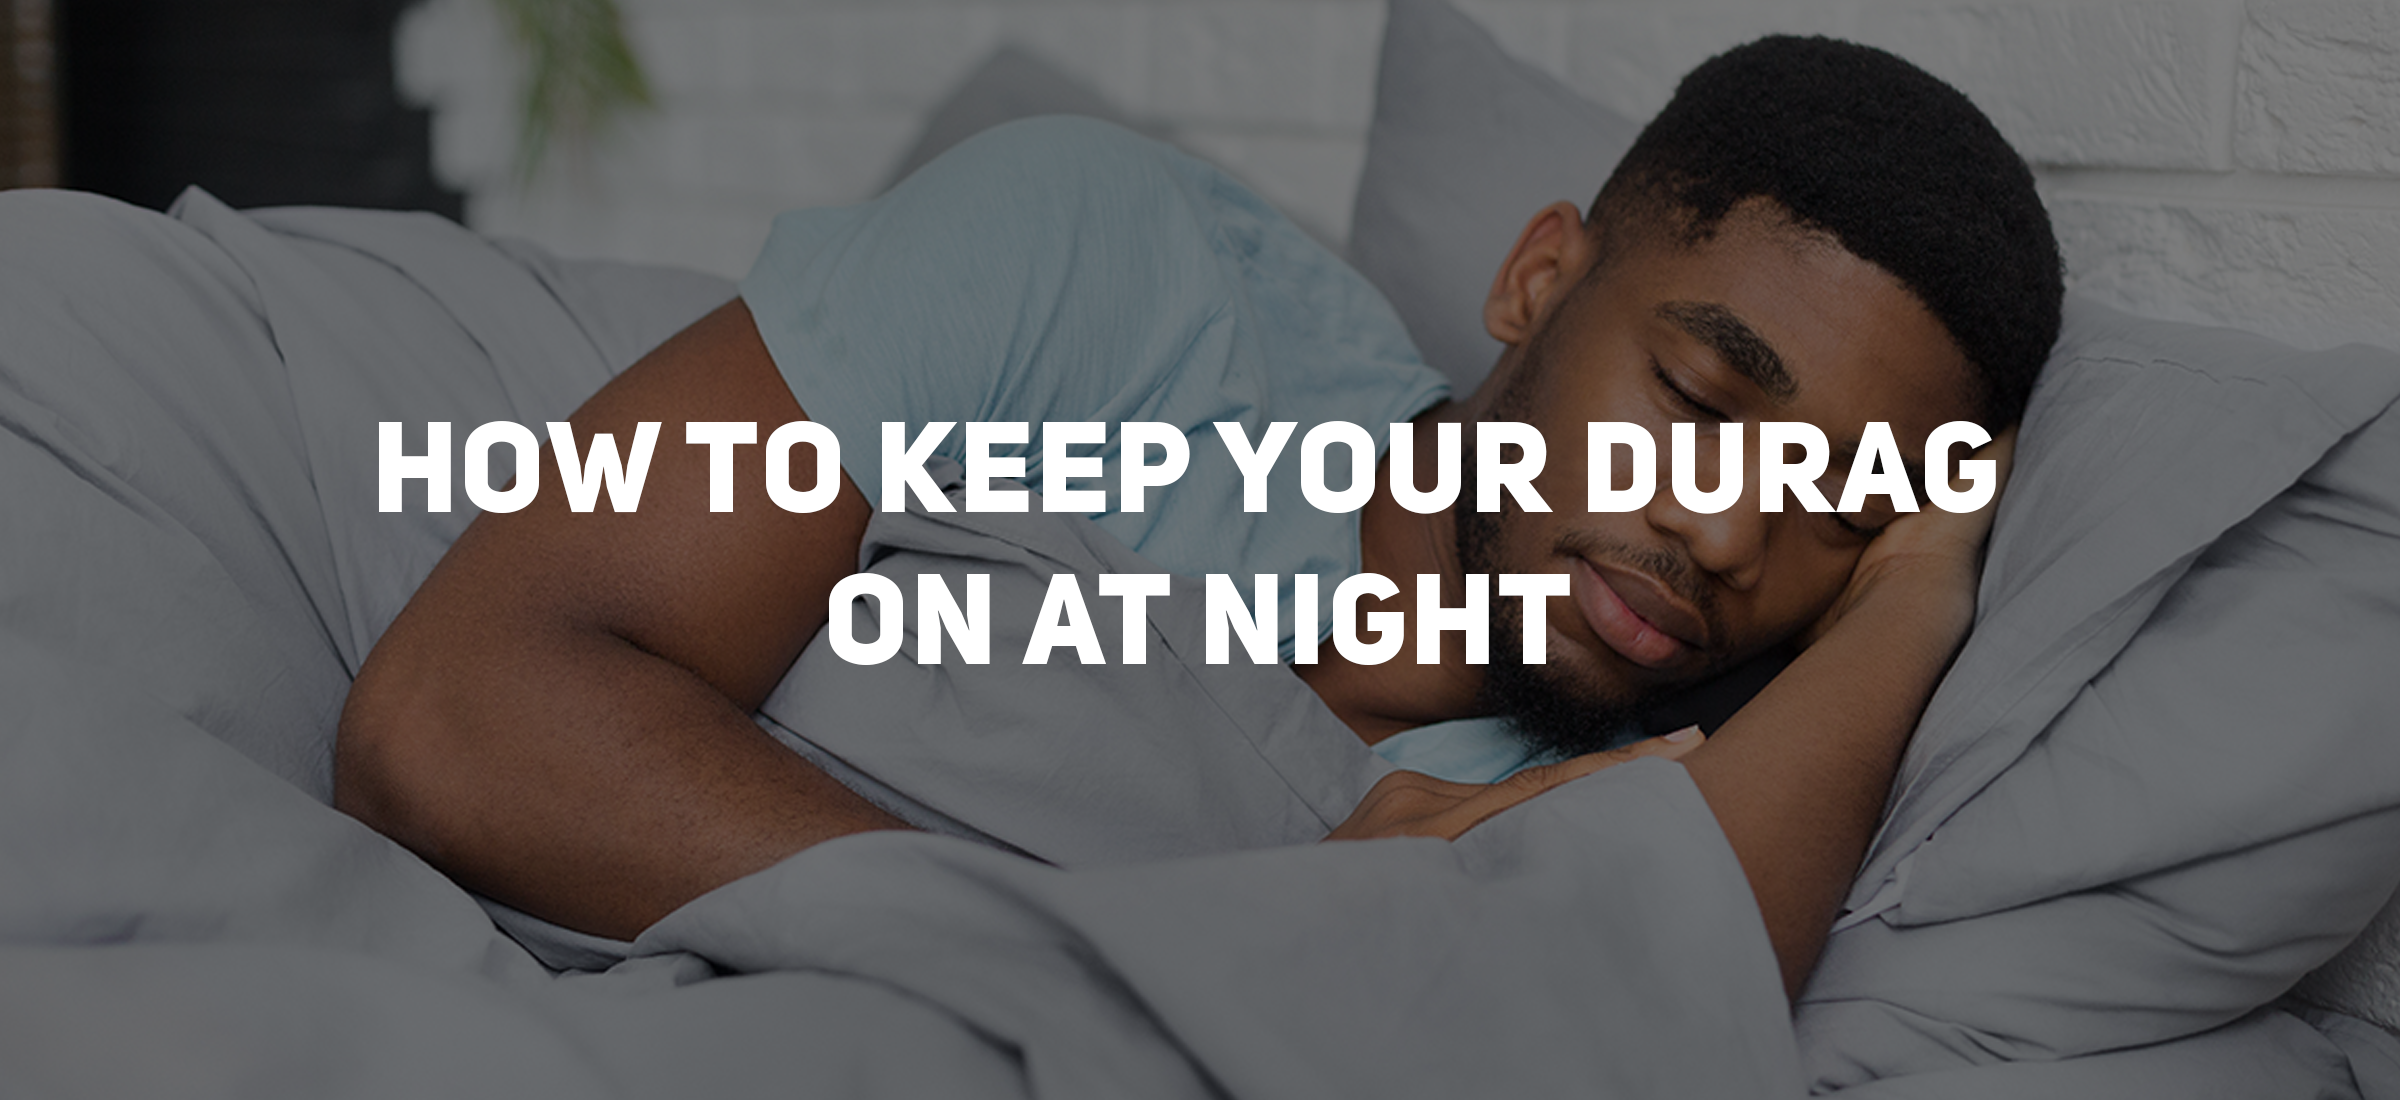 How to Keep Your Durag on at Night: Tips and Tricks